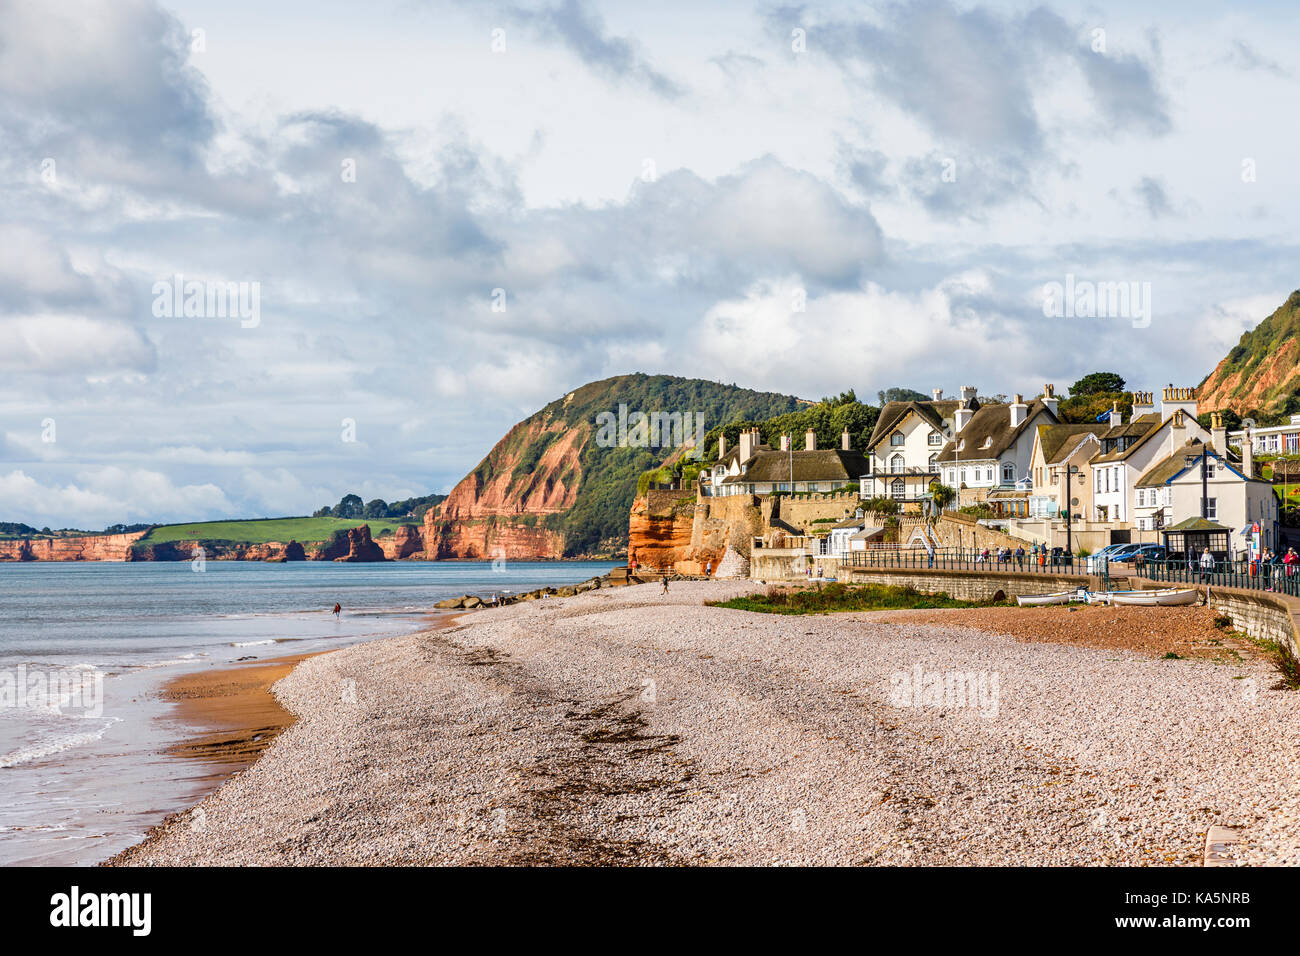 Seashore, stony beach and view of cliffs, Sidmouth, a coastal town and popular holiday resort on the English Channel coast, Devon, South West England Stock Photo